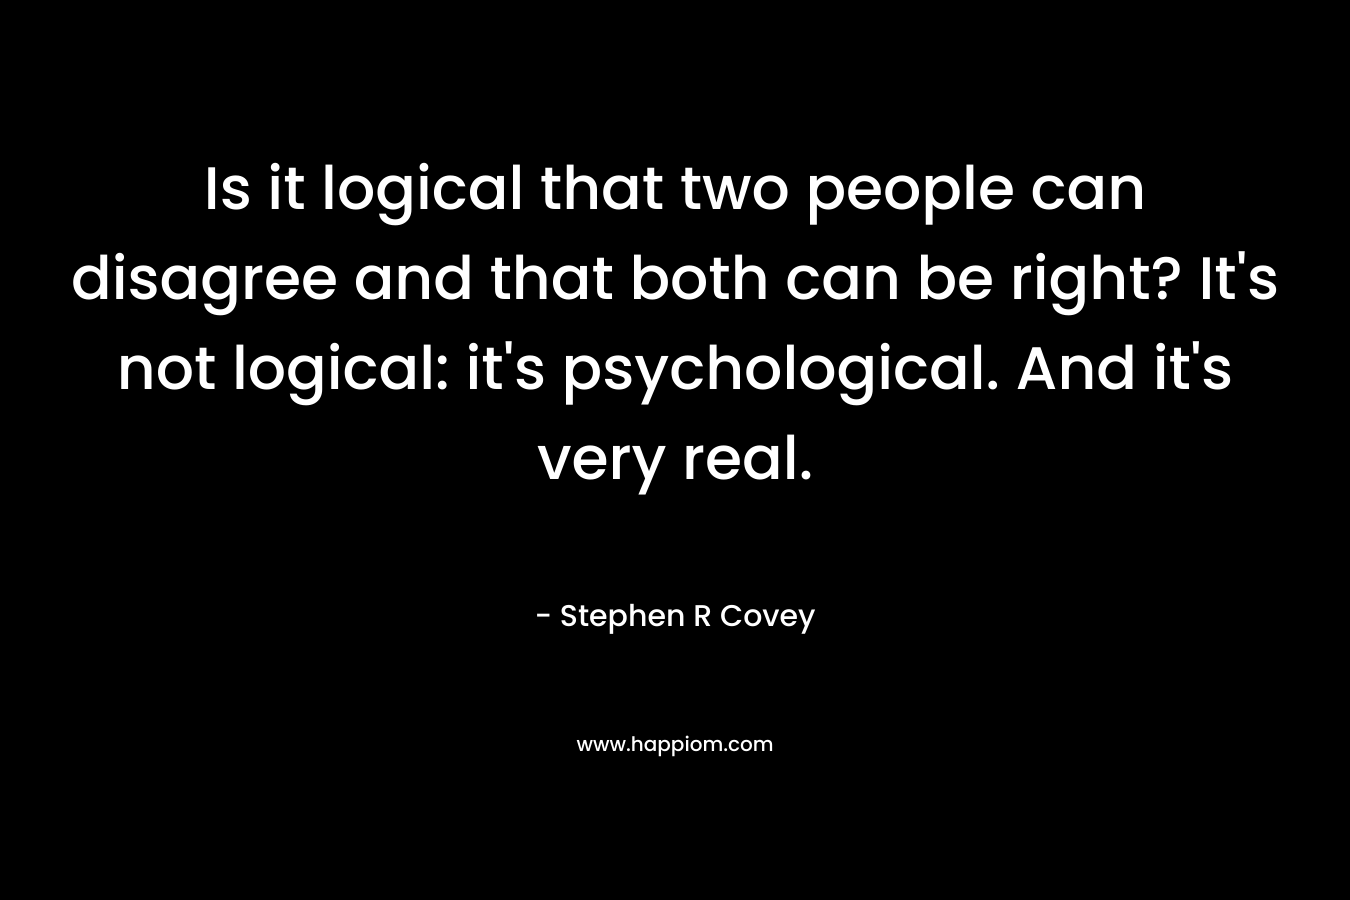 Is it logical that two people can disagree and that both can be right? It's not logical: it's psychological. And it's very real.